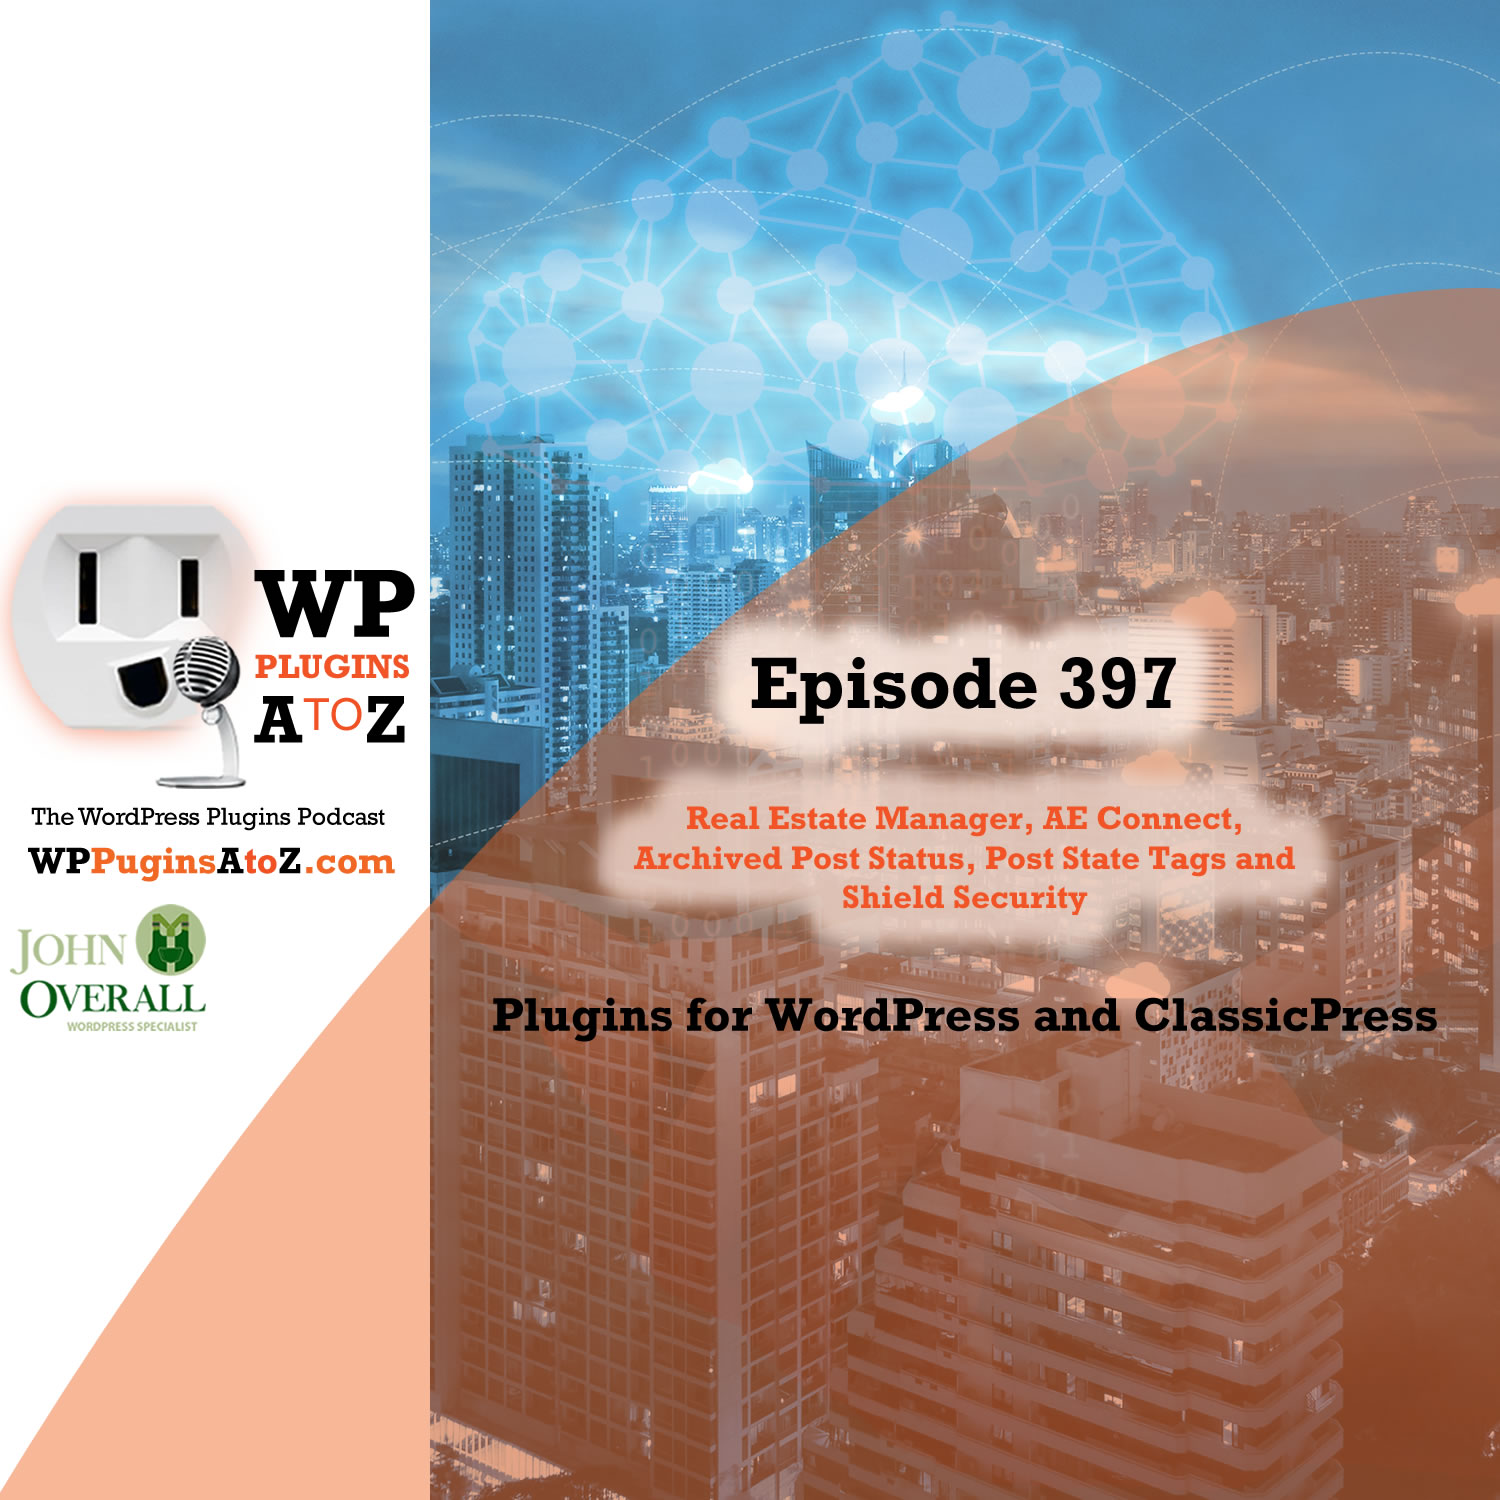 It's Episode 397 and I've got plugins for Property Management, Social Connections, Archiving Posts, State of Posts, and Classic Press Options. It's all coming up on WordPress Plugins A-Z!